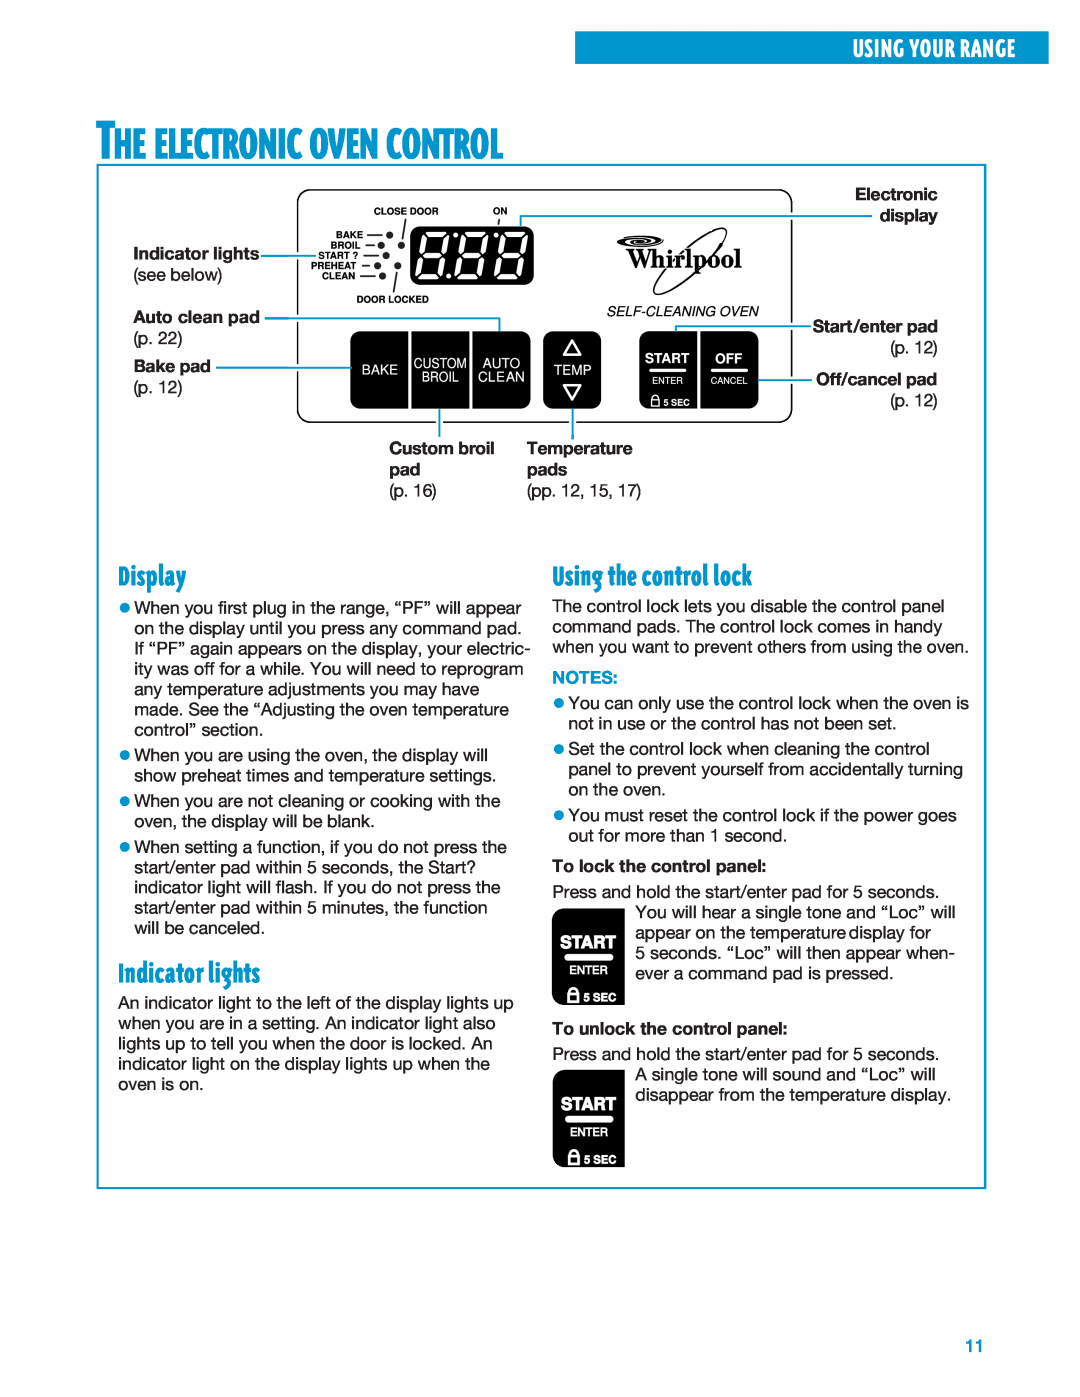 Whirlpool SF360BEE The Electronic Oven Control, Display, Indicator lights, Using the control lock, Using Your Range 